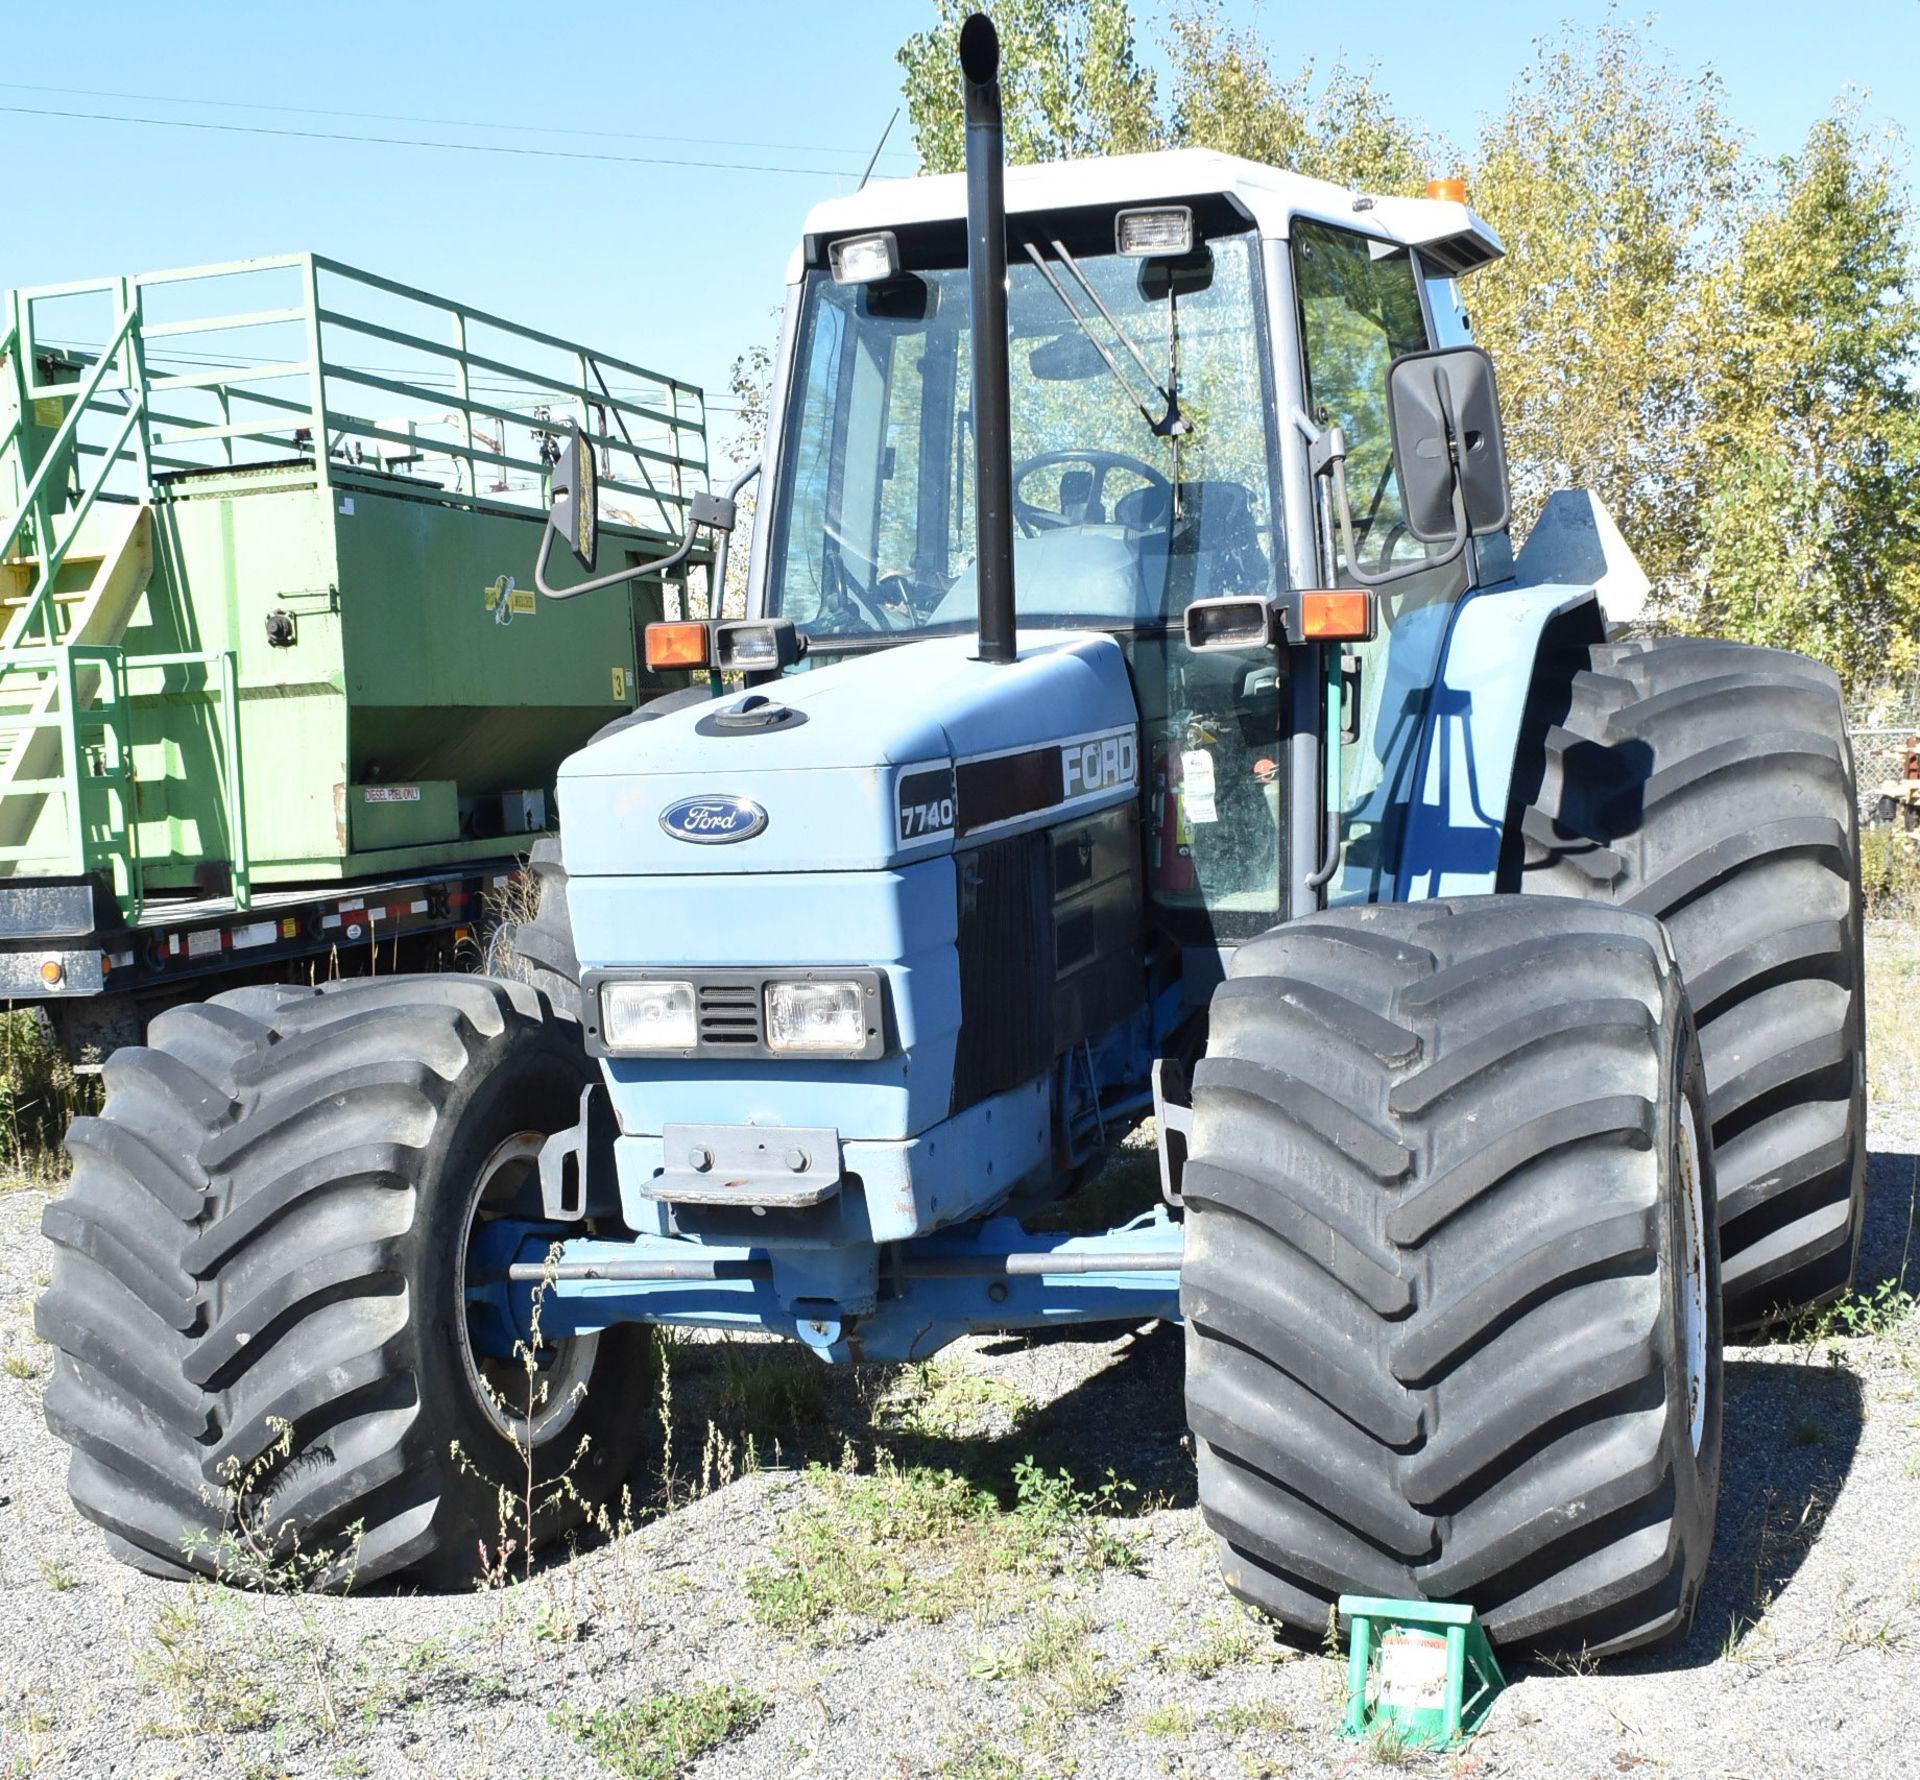 FORD 7740 ROW-CROP TRACTOR WITH FORD 5.0L 4 CYLINDER DIESEL ENGINE, CLIMATE CONTROL, AM/FM RADIO - Image 3 of 9